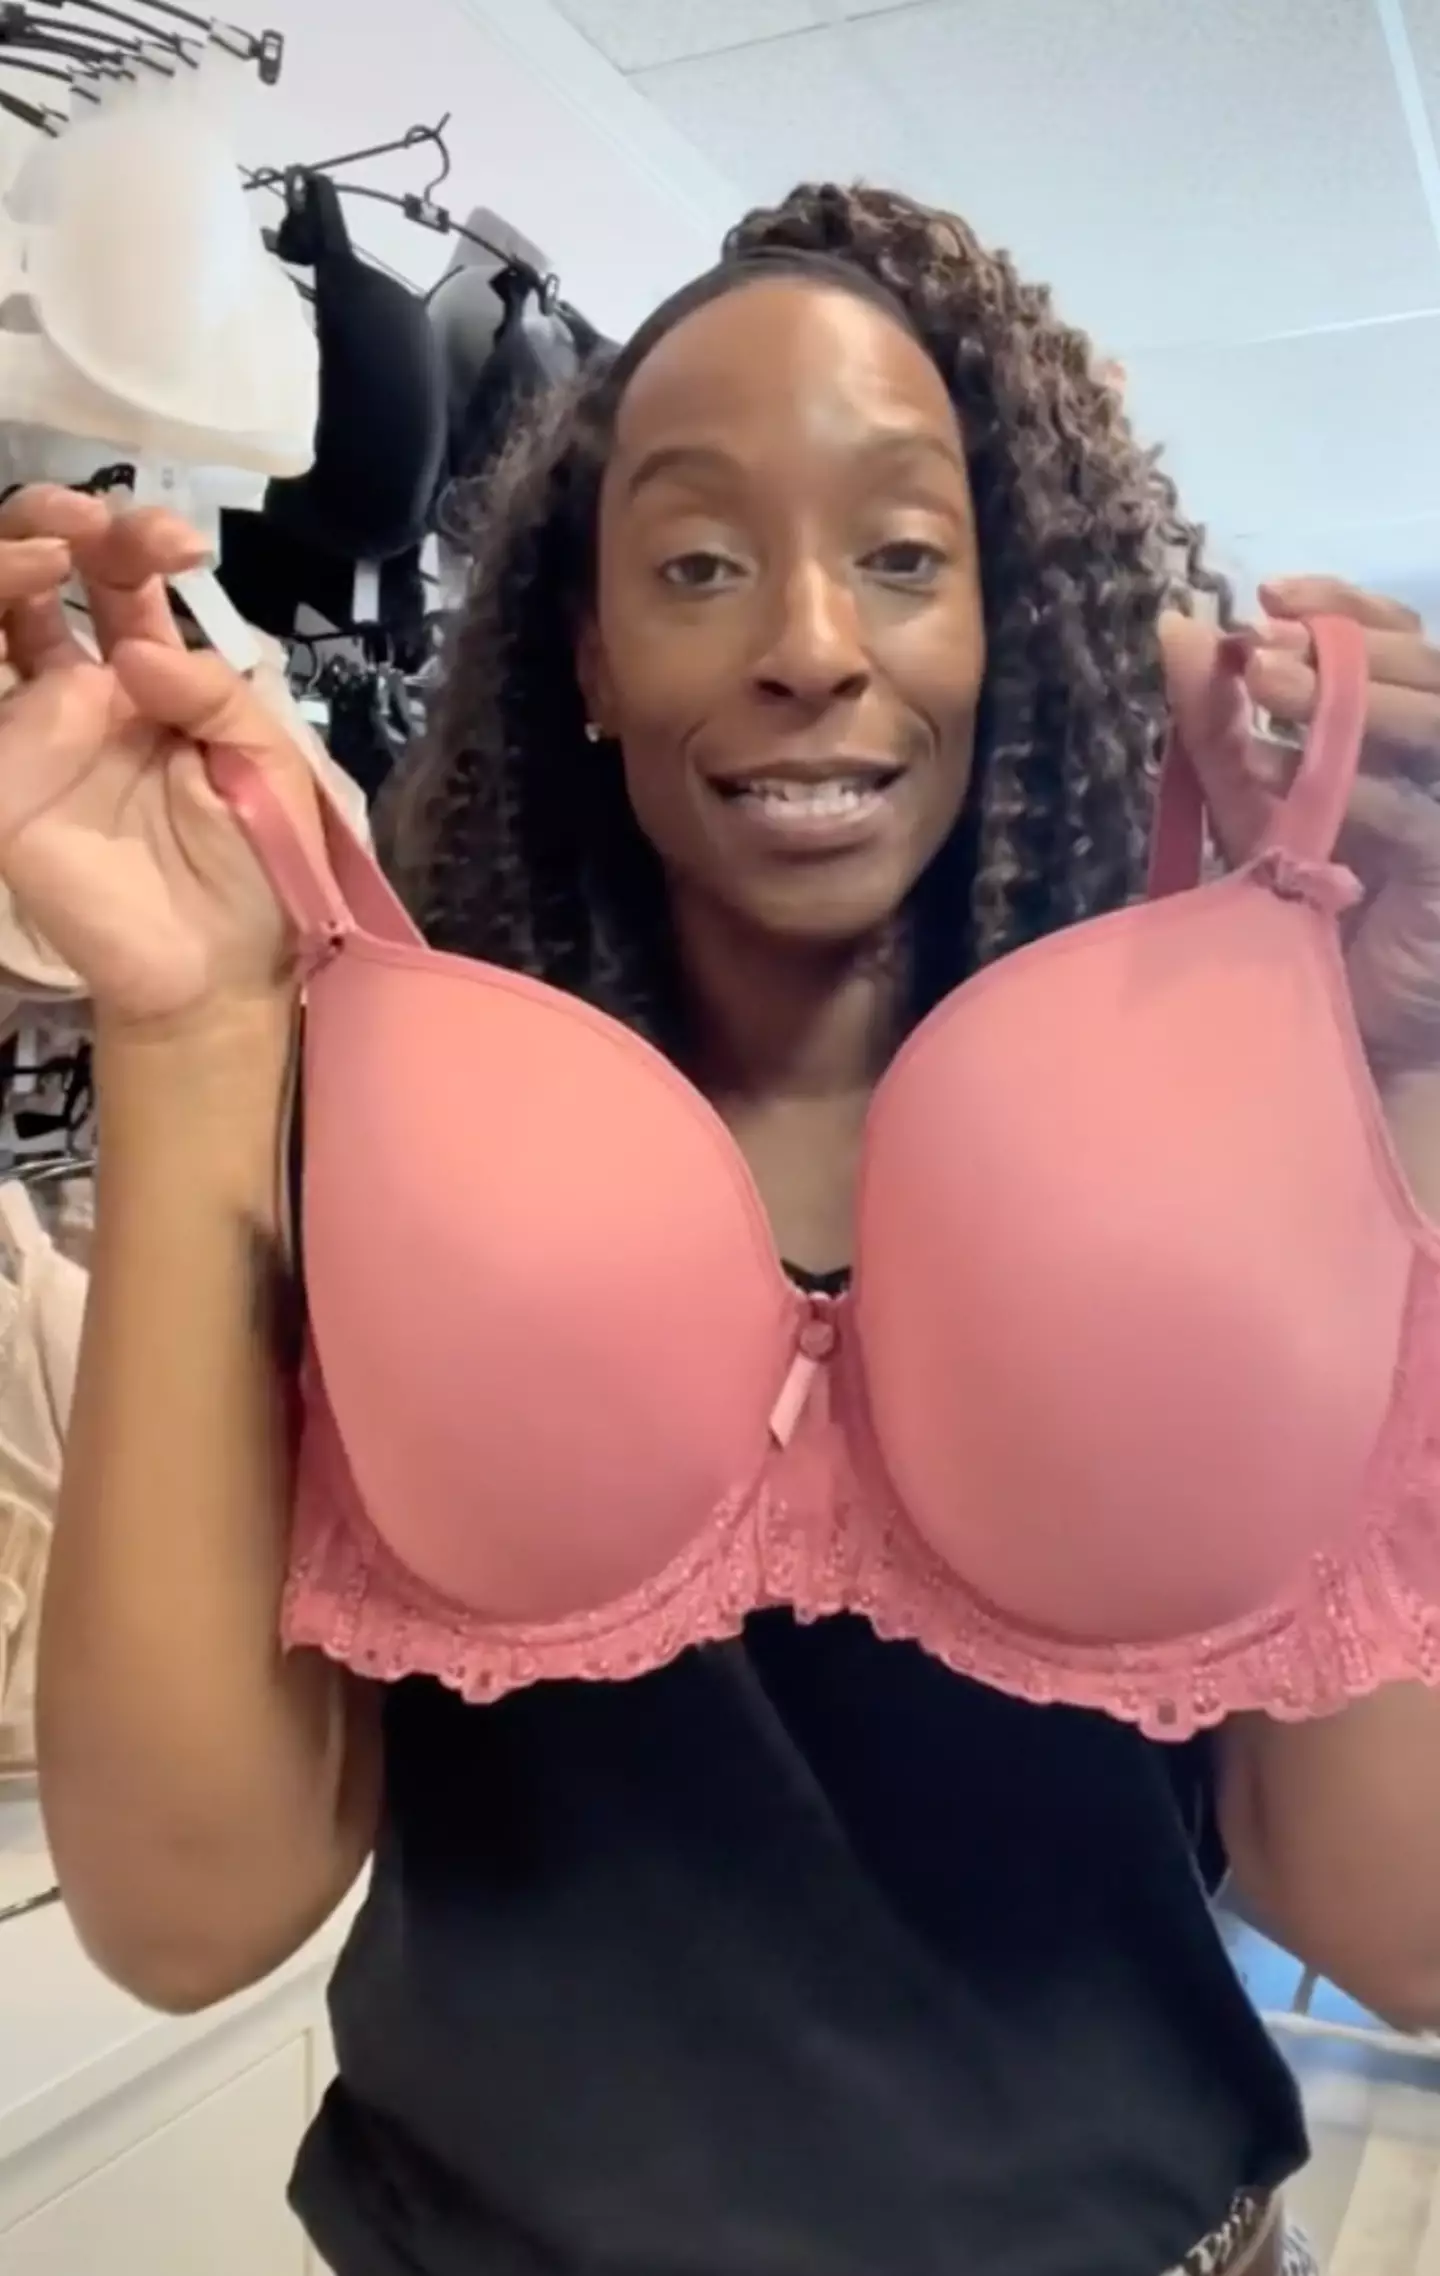 Nicola explained how often you should change your bra.